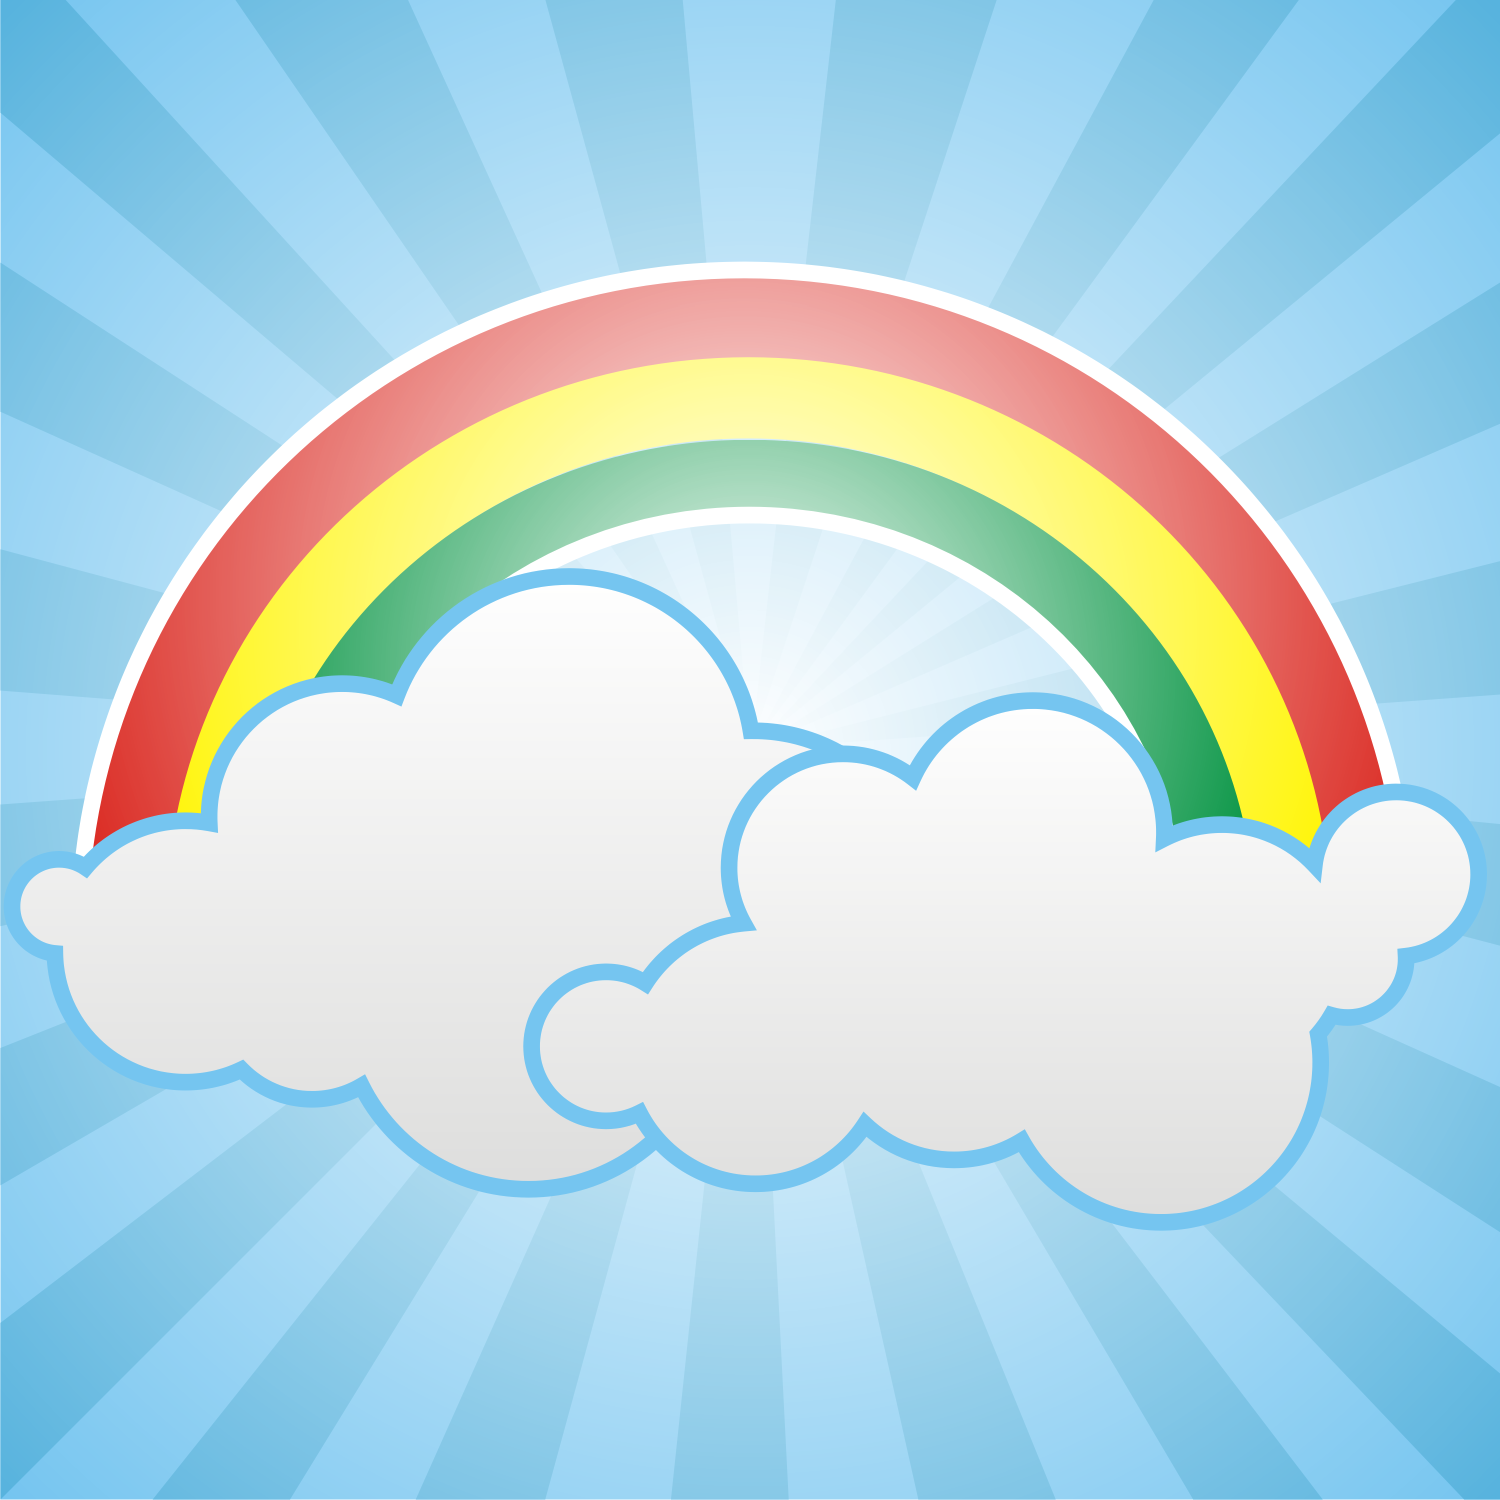 Download Vector for free use: Background with clouds vector